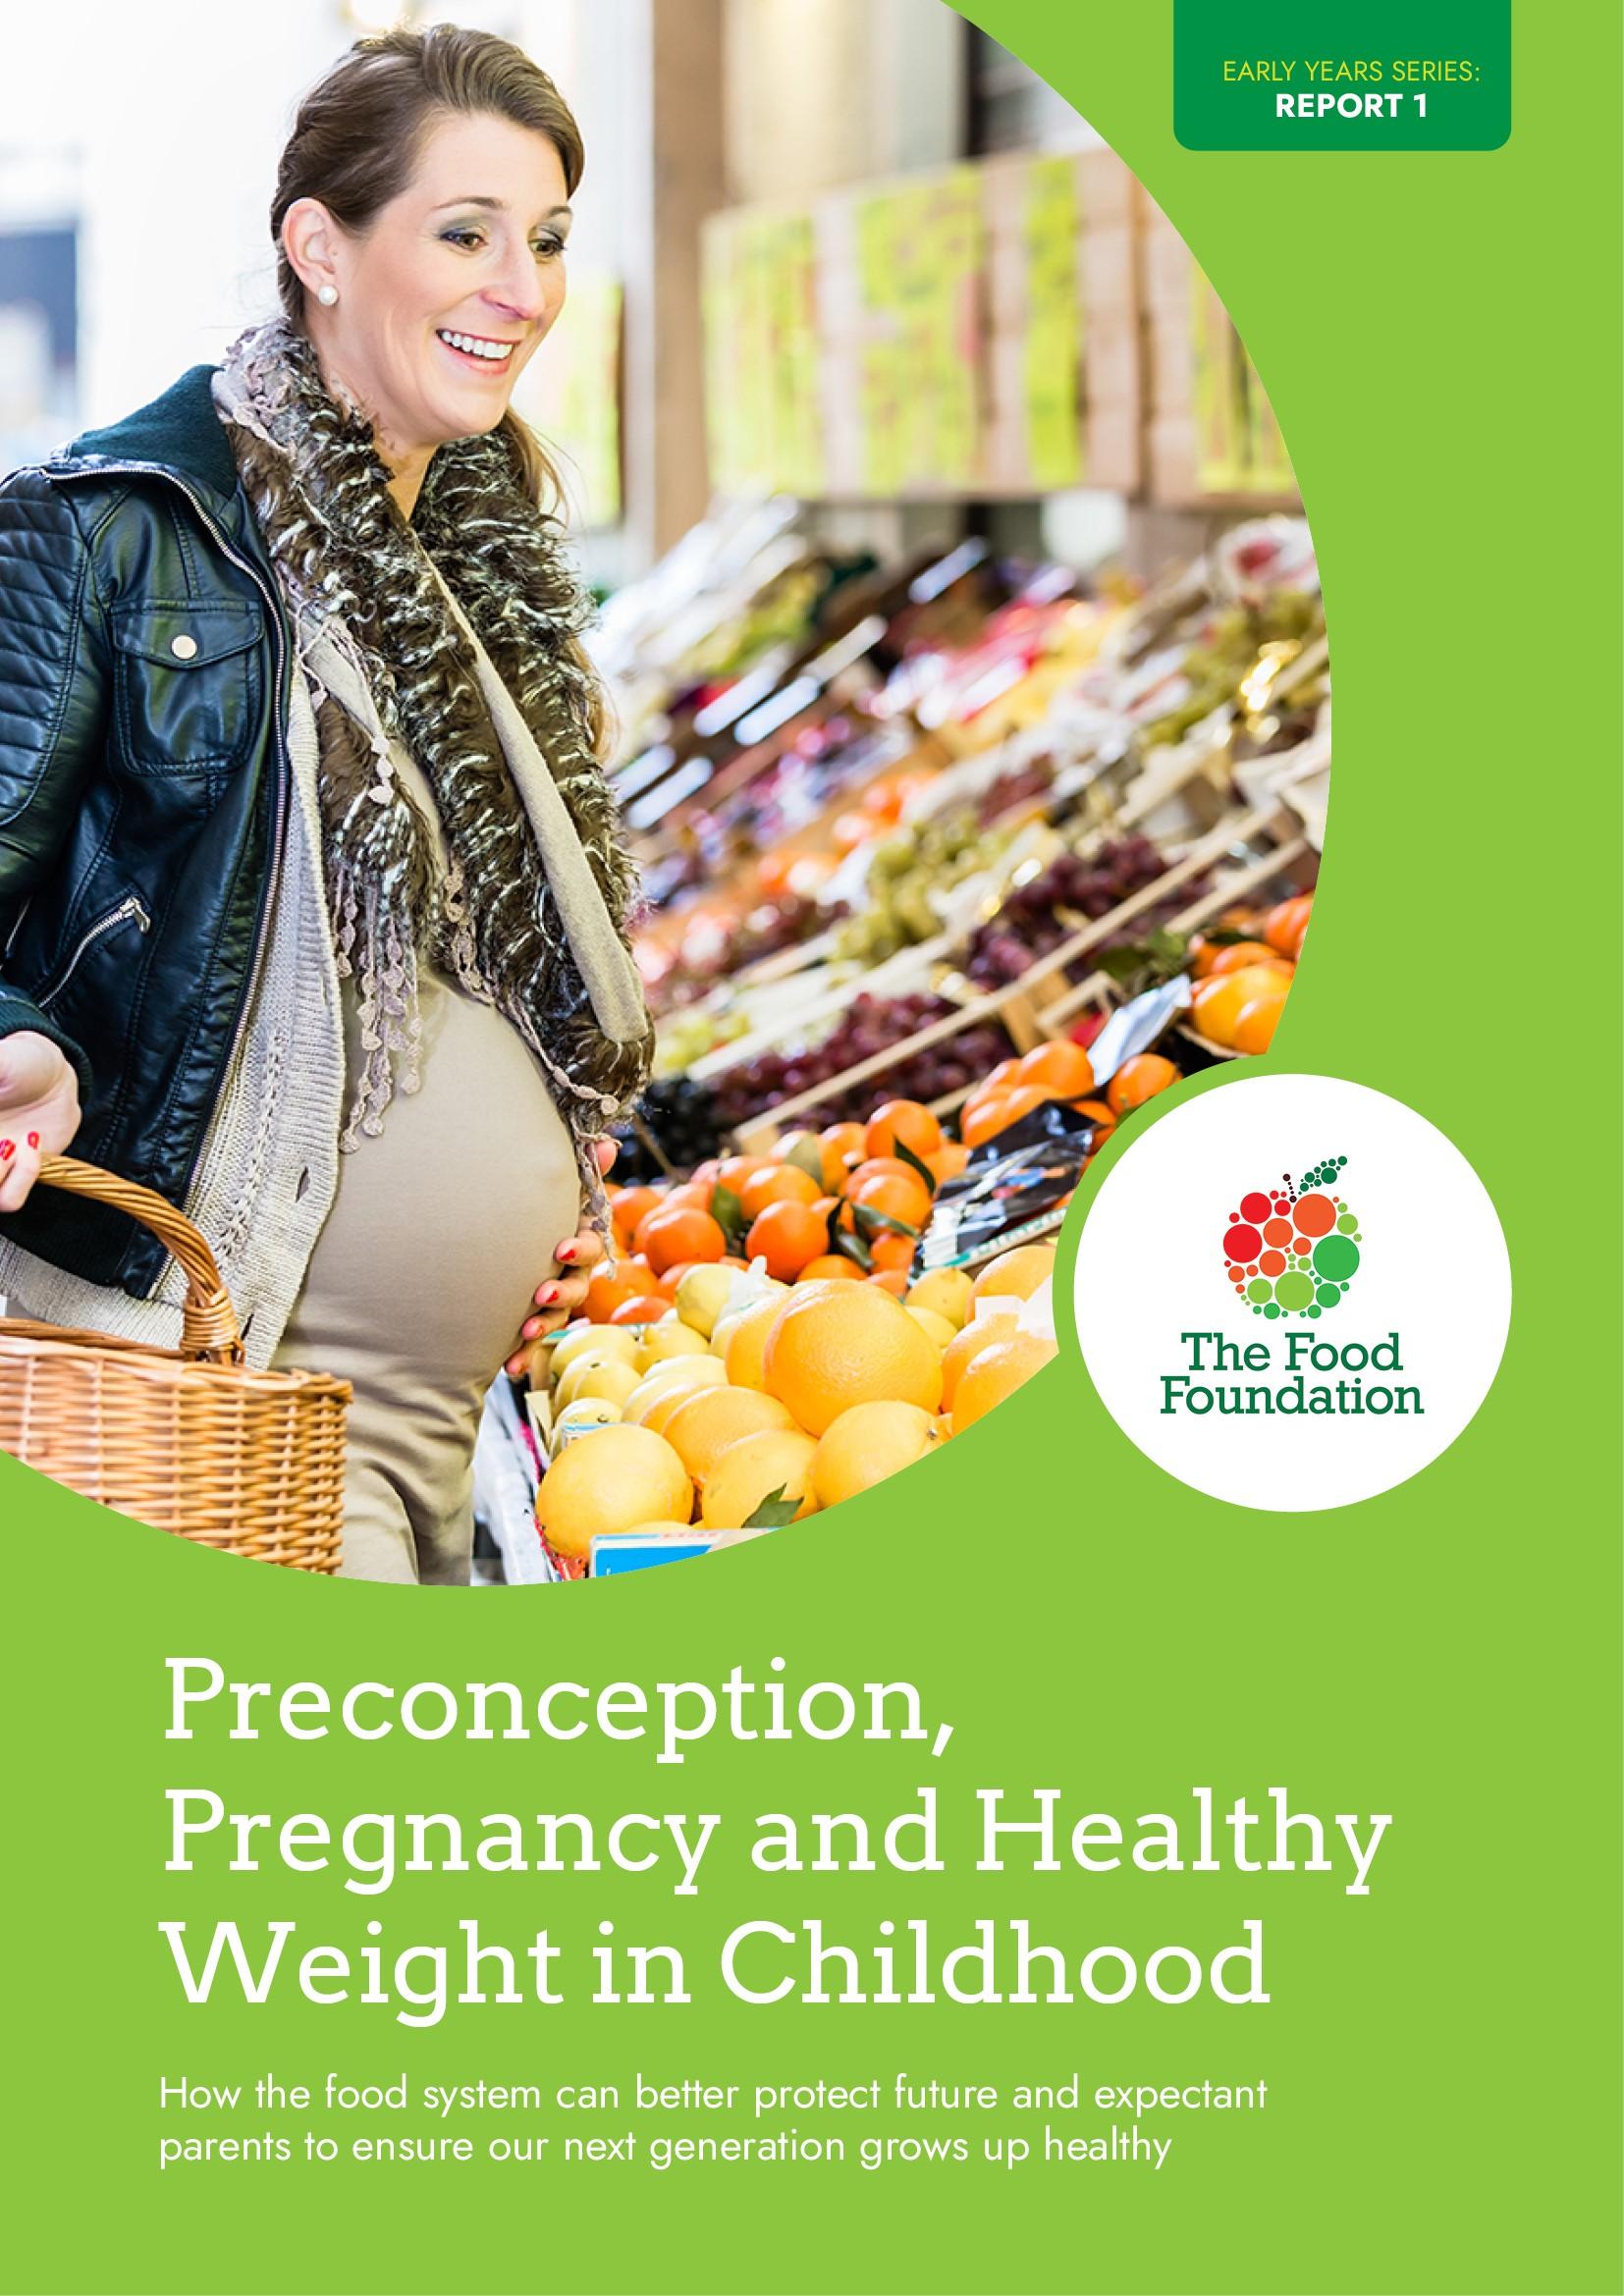 Preconception, Pregnancy and Healthy Weight in Childhood report 